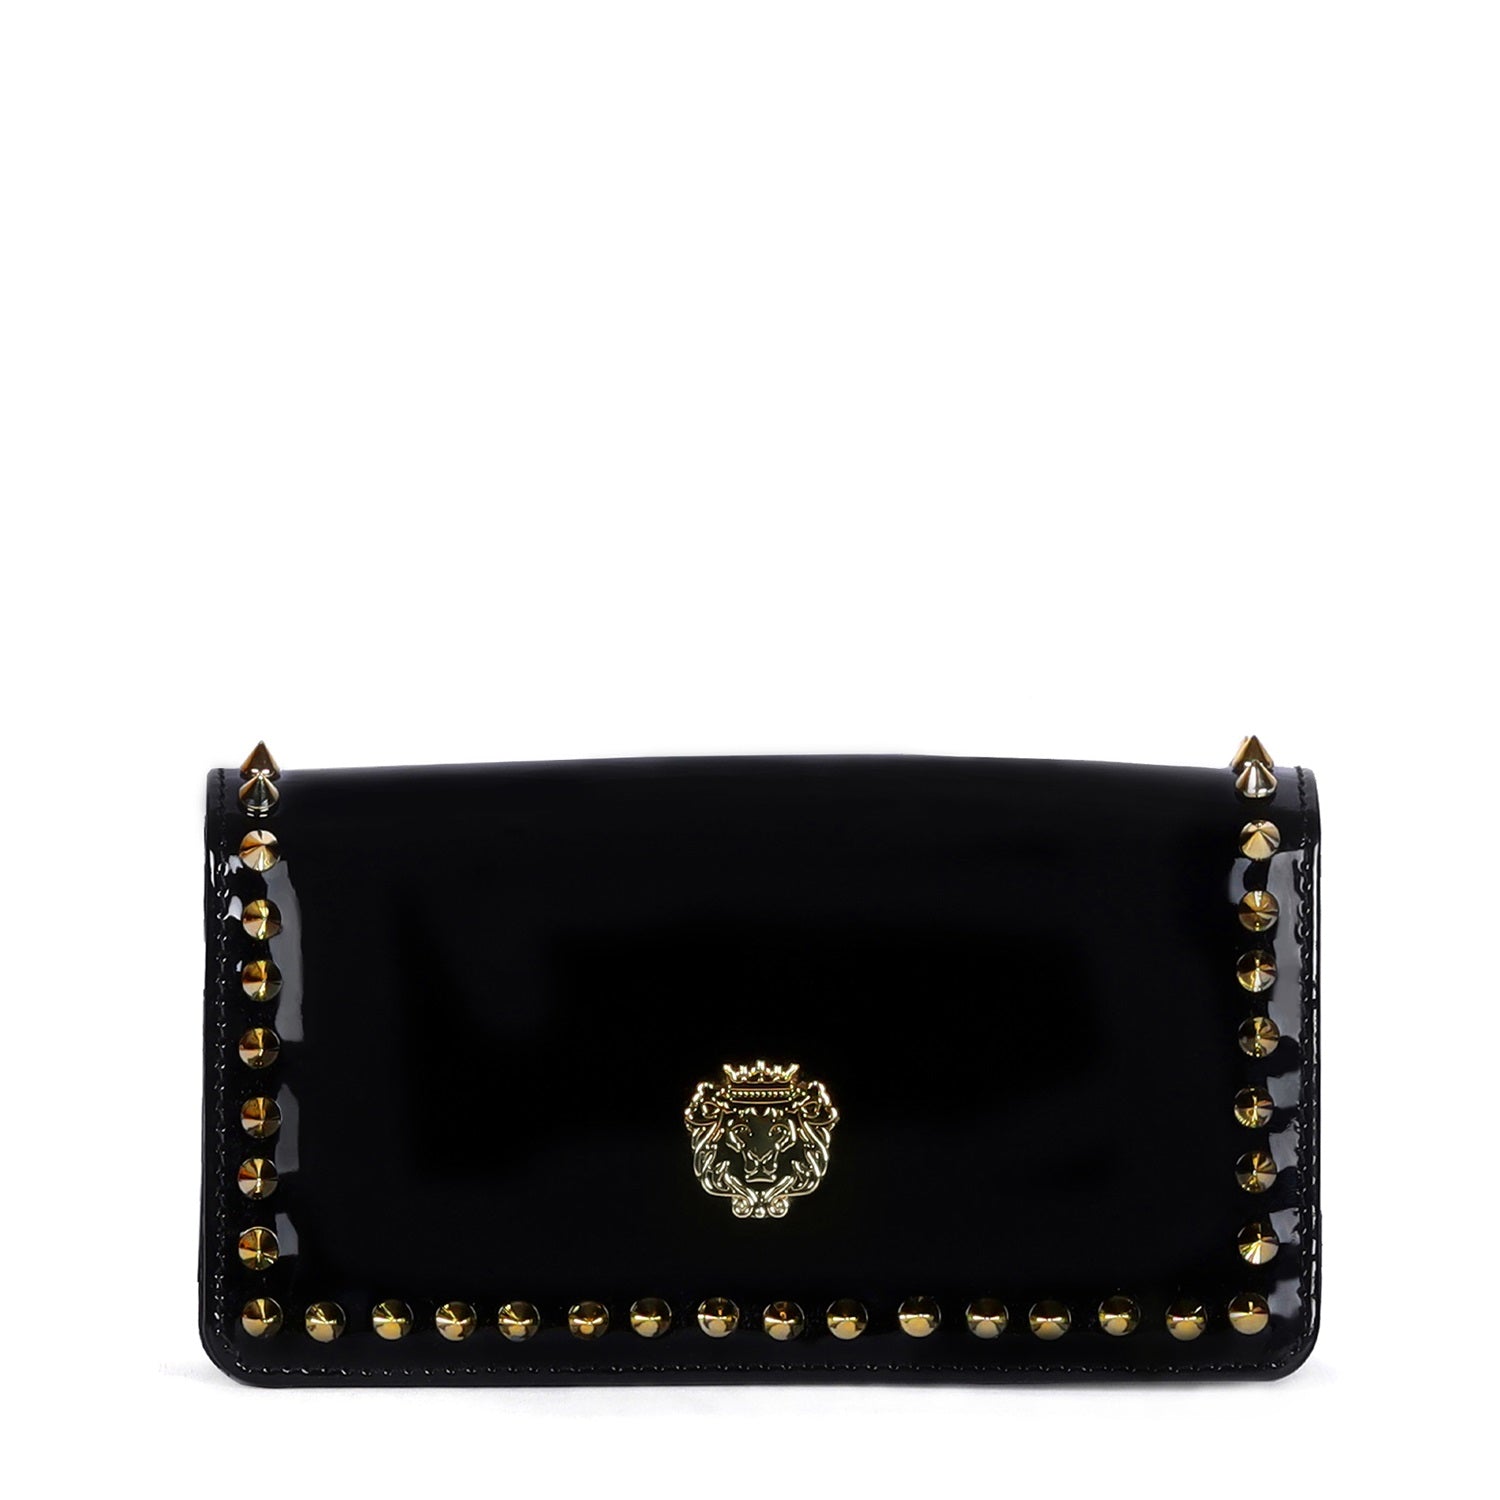 Studded Ladies Clutch/Wallet in Black Patent Leather